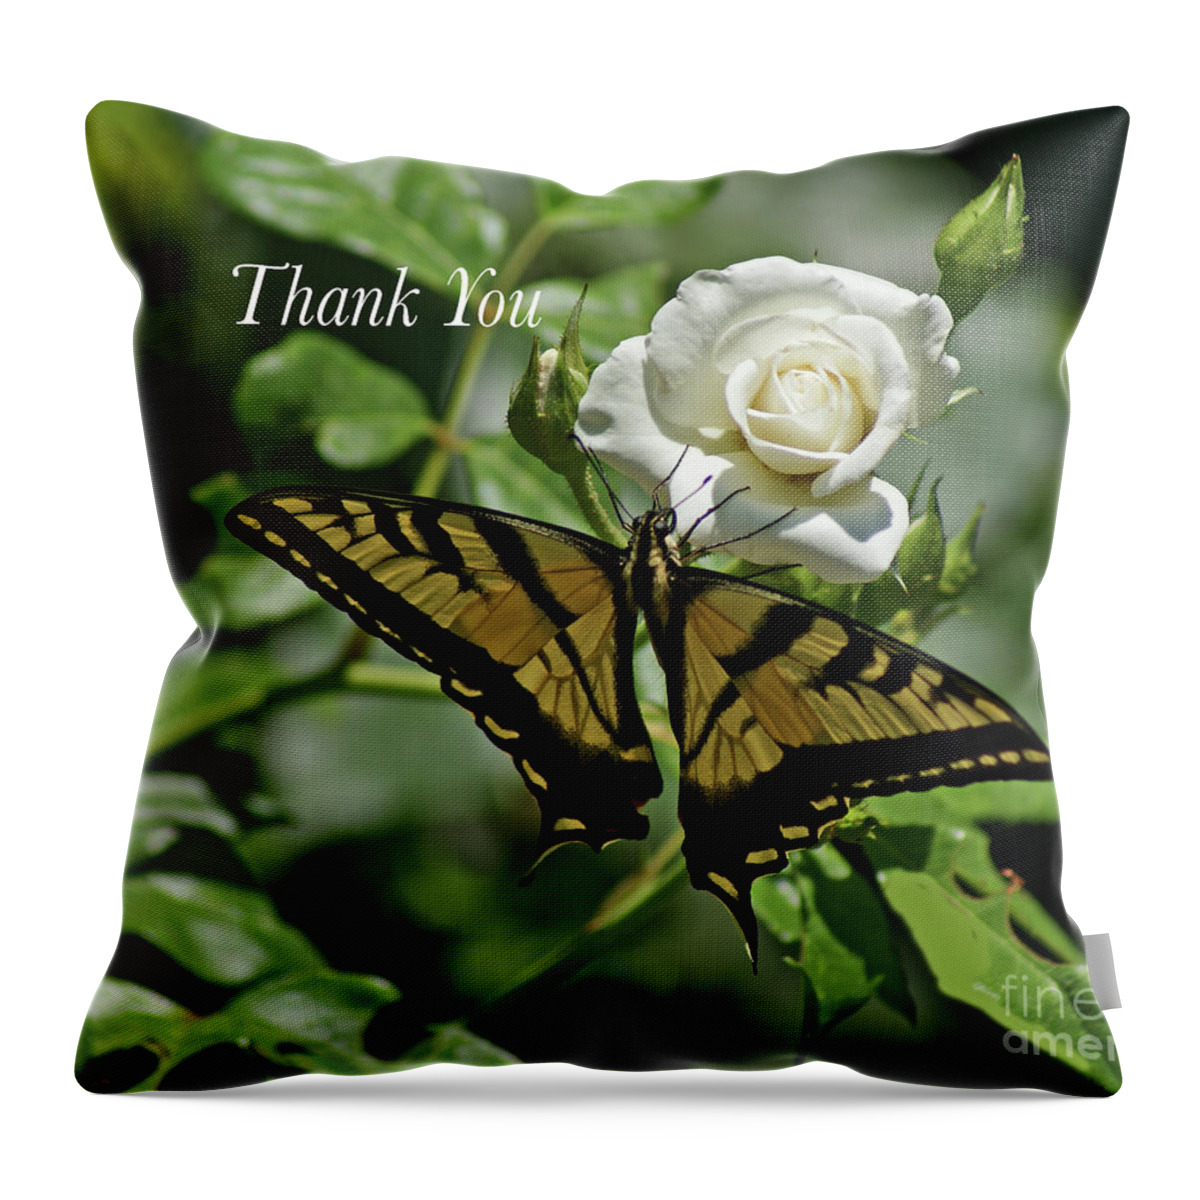 Card Throw Pillow featuring the photograph Thank You Butterfly by Debby Pueschel